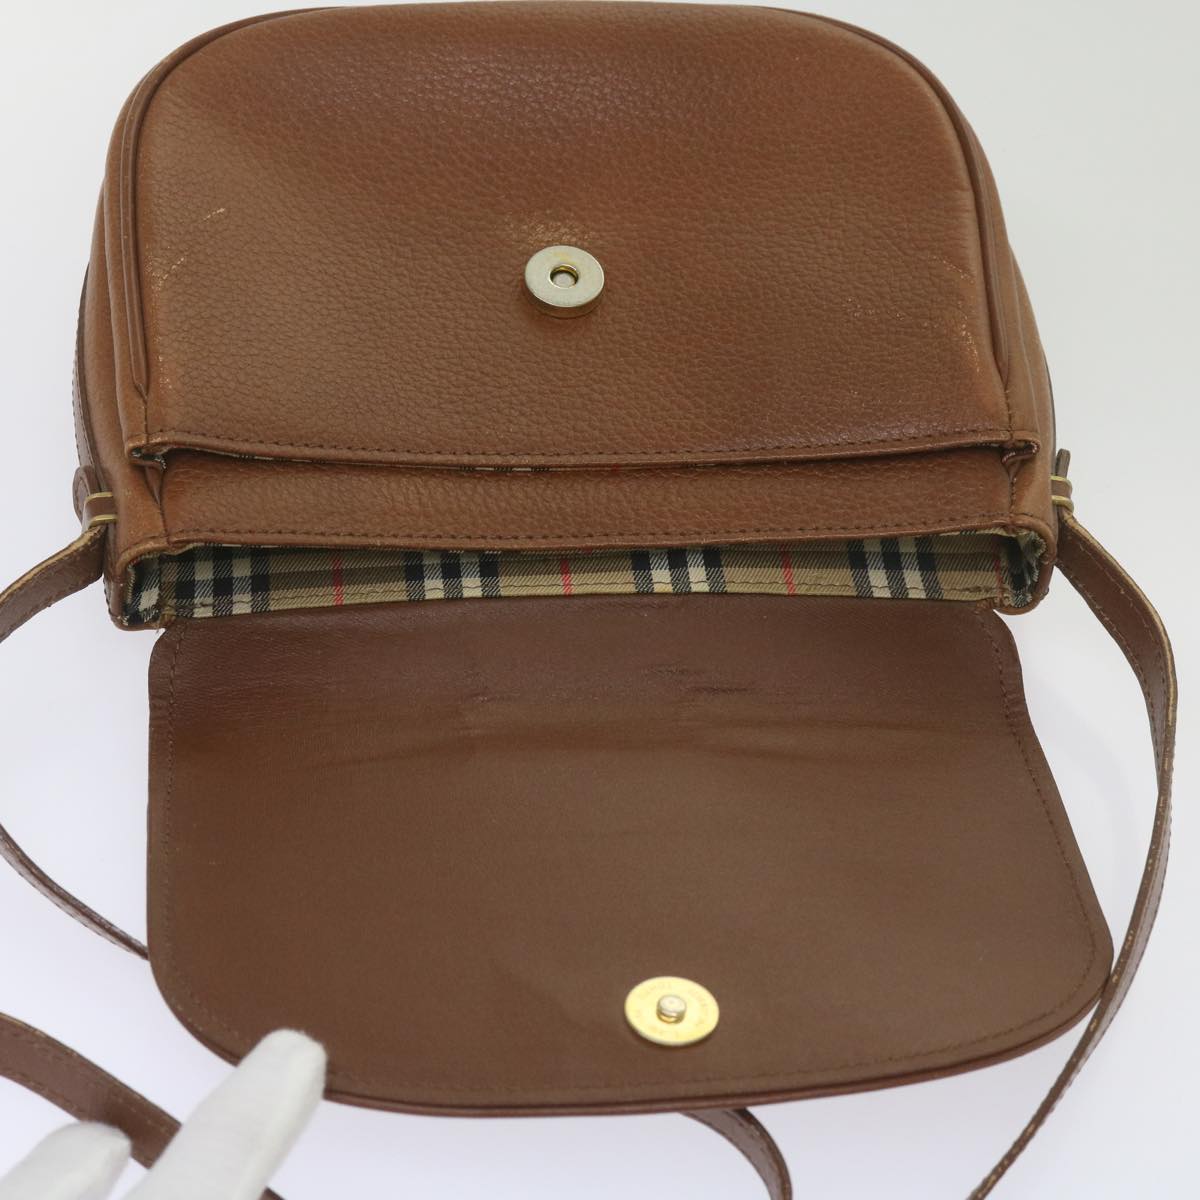 Burberrys Shoulder Bag Leather Brown Auth ep3582